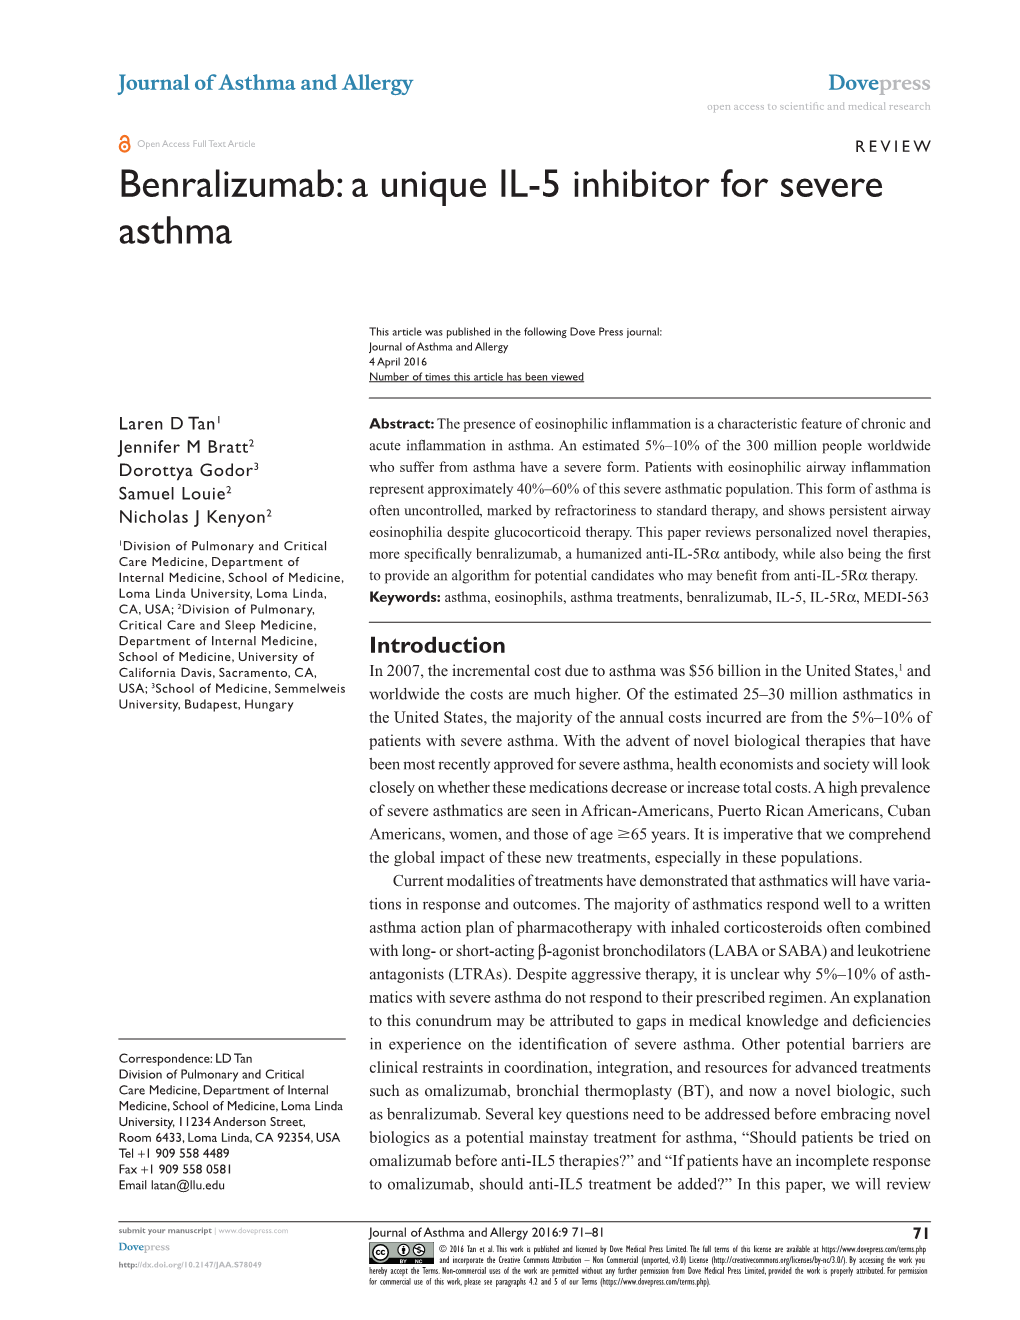 Benralizumab: a Unique IL-5 Inhibitor for Severe Asthma